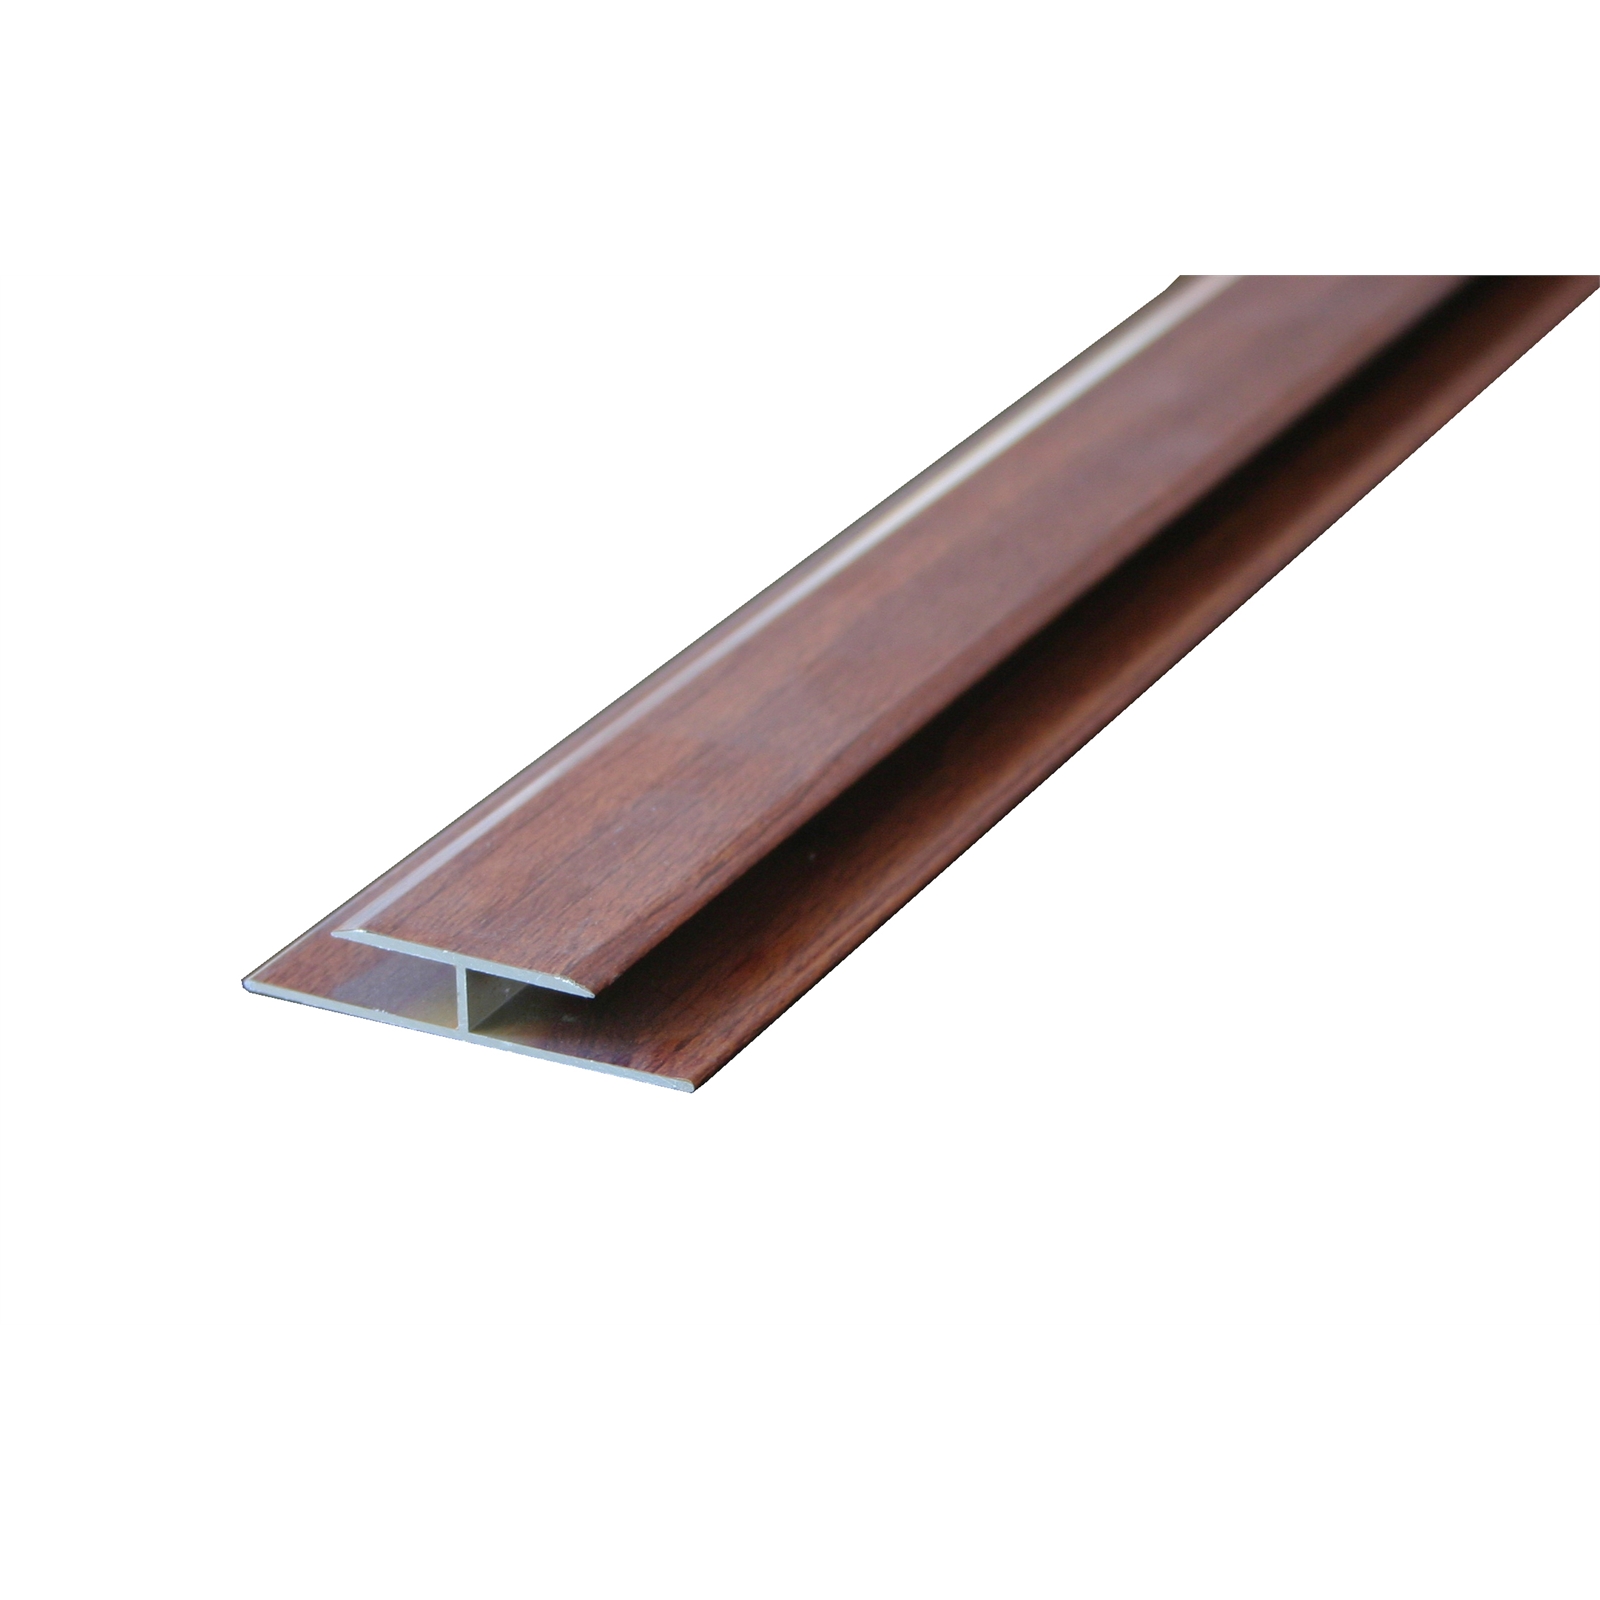 Roberts 1.65m x 8mm Mid-Dark Expansion Joint Timbertone Floating Floor Trim